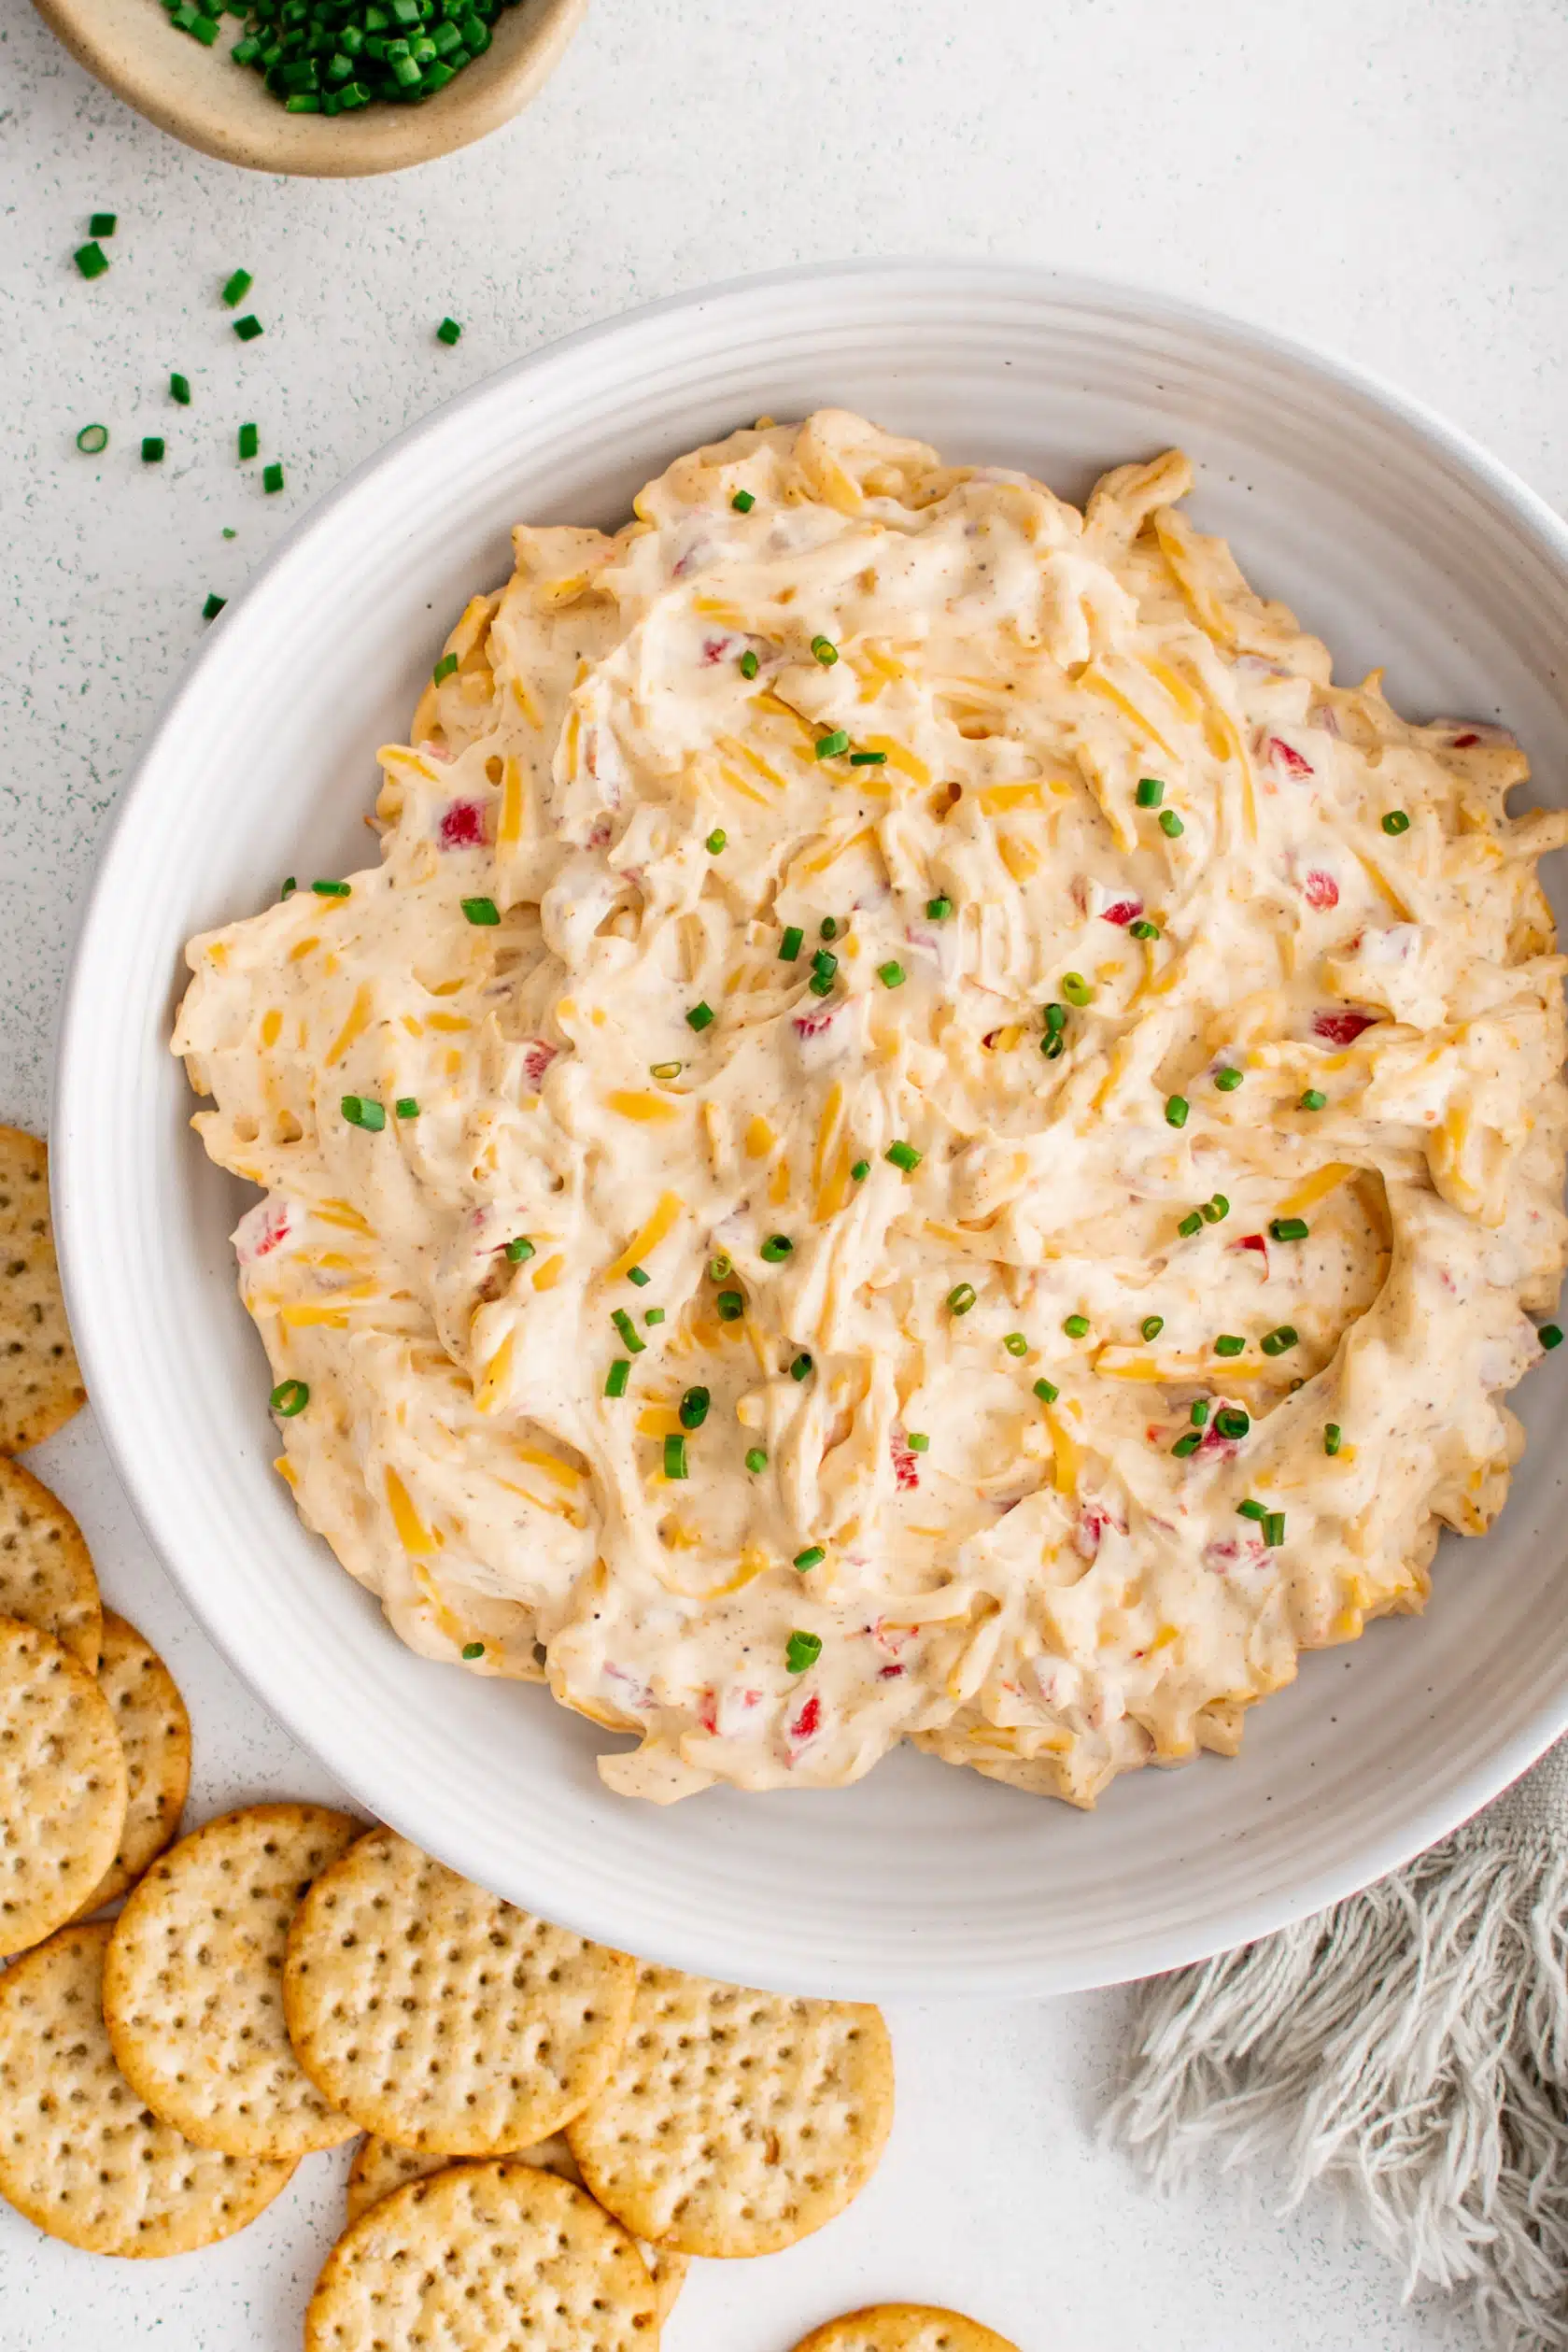 Large shallow mixing bowl filled with pimento cheese dip garnished with freshly chopped chives and served with crackers on the side.